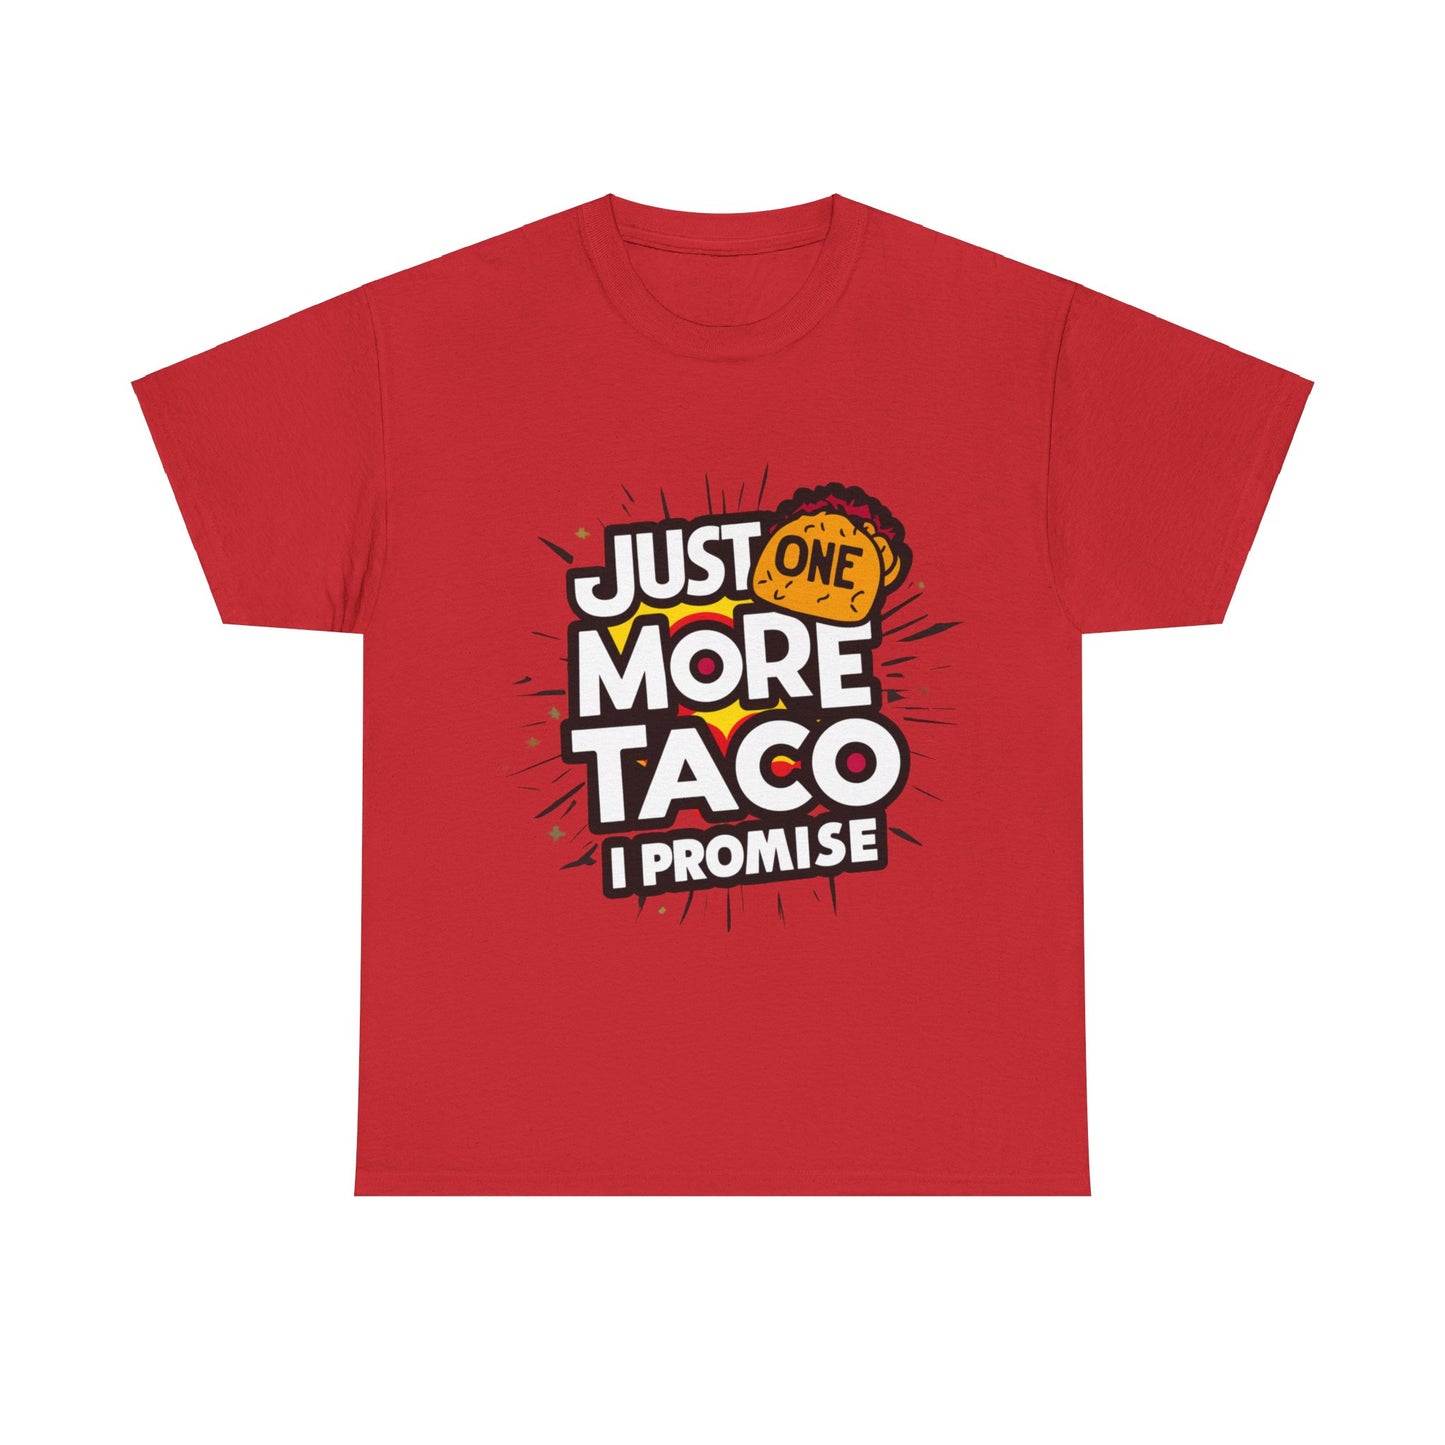 Copy of Just One More Taco I Promise Mexican Food Graphic Unisex Heavy Cotton Tee Cotton Funny Humorous Graphic Soft Premium Unisex Men Women Red T-shirt Birthday Gift-7